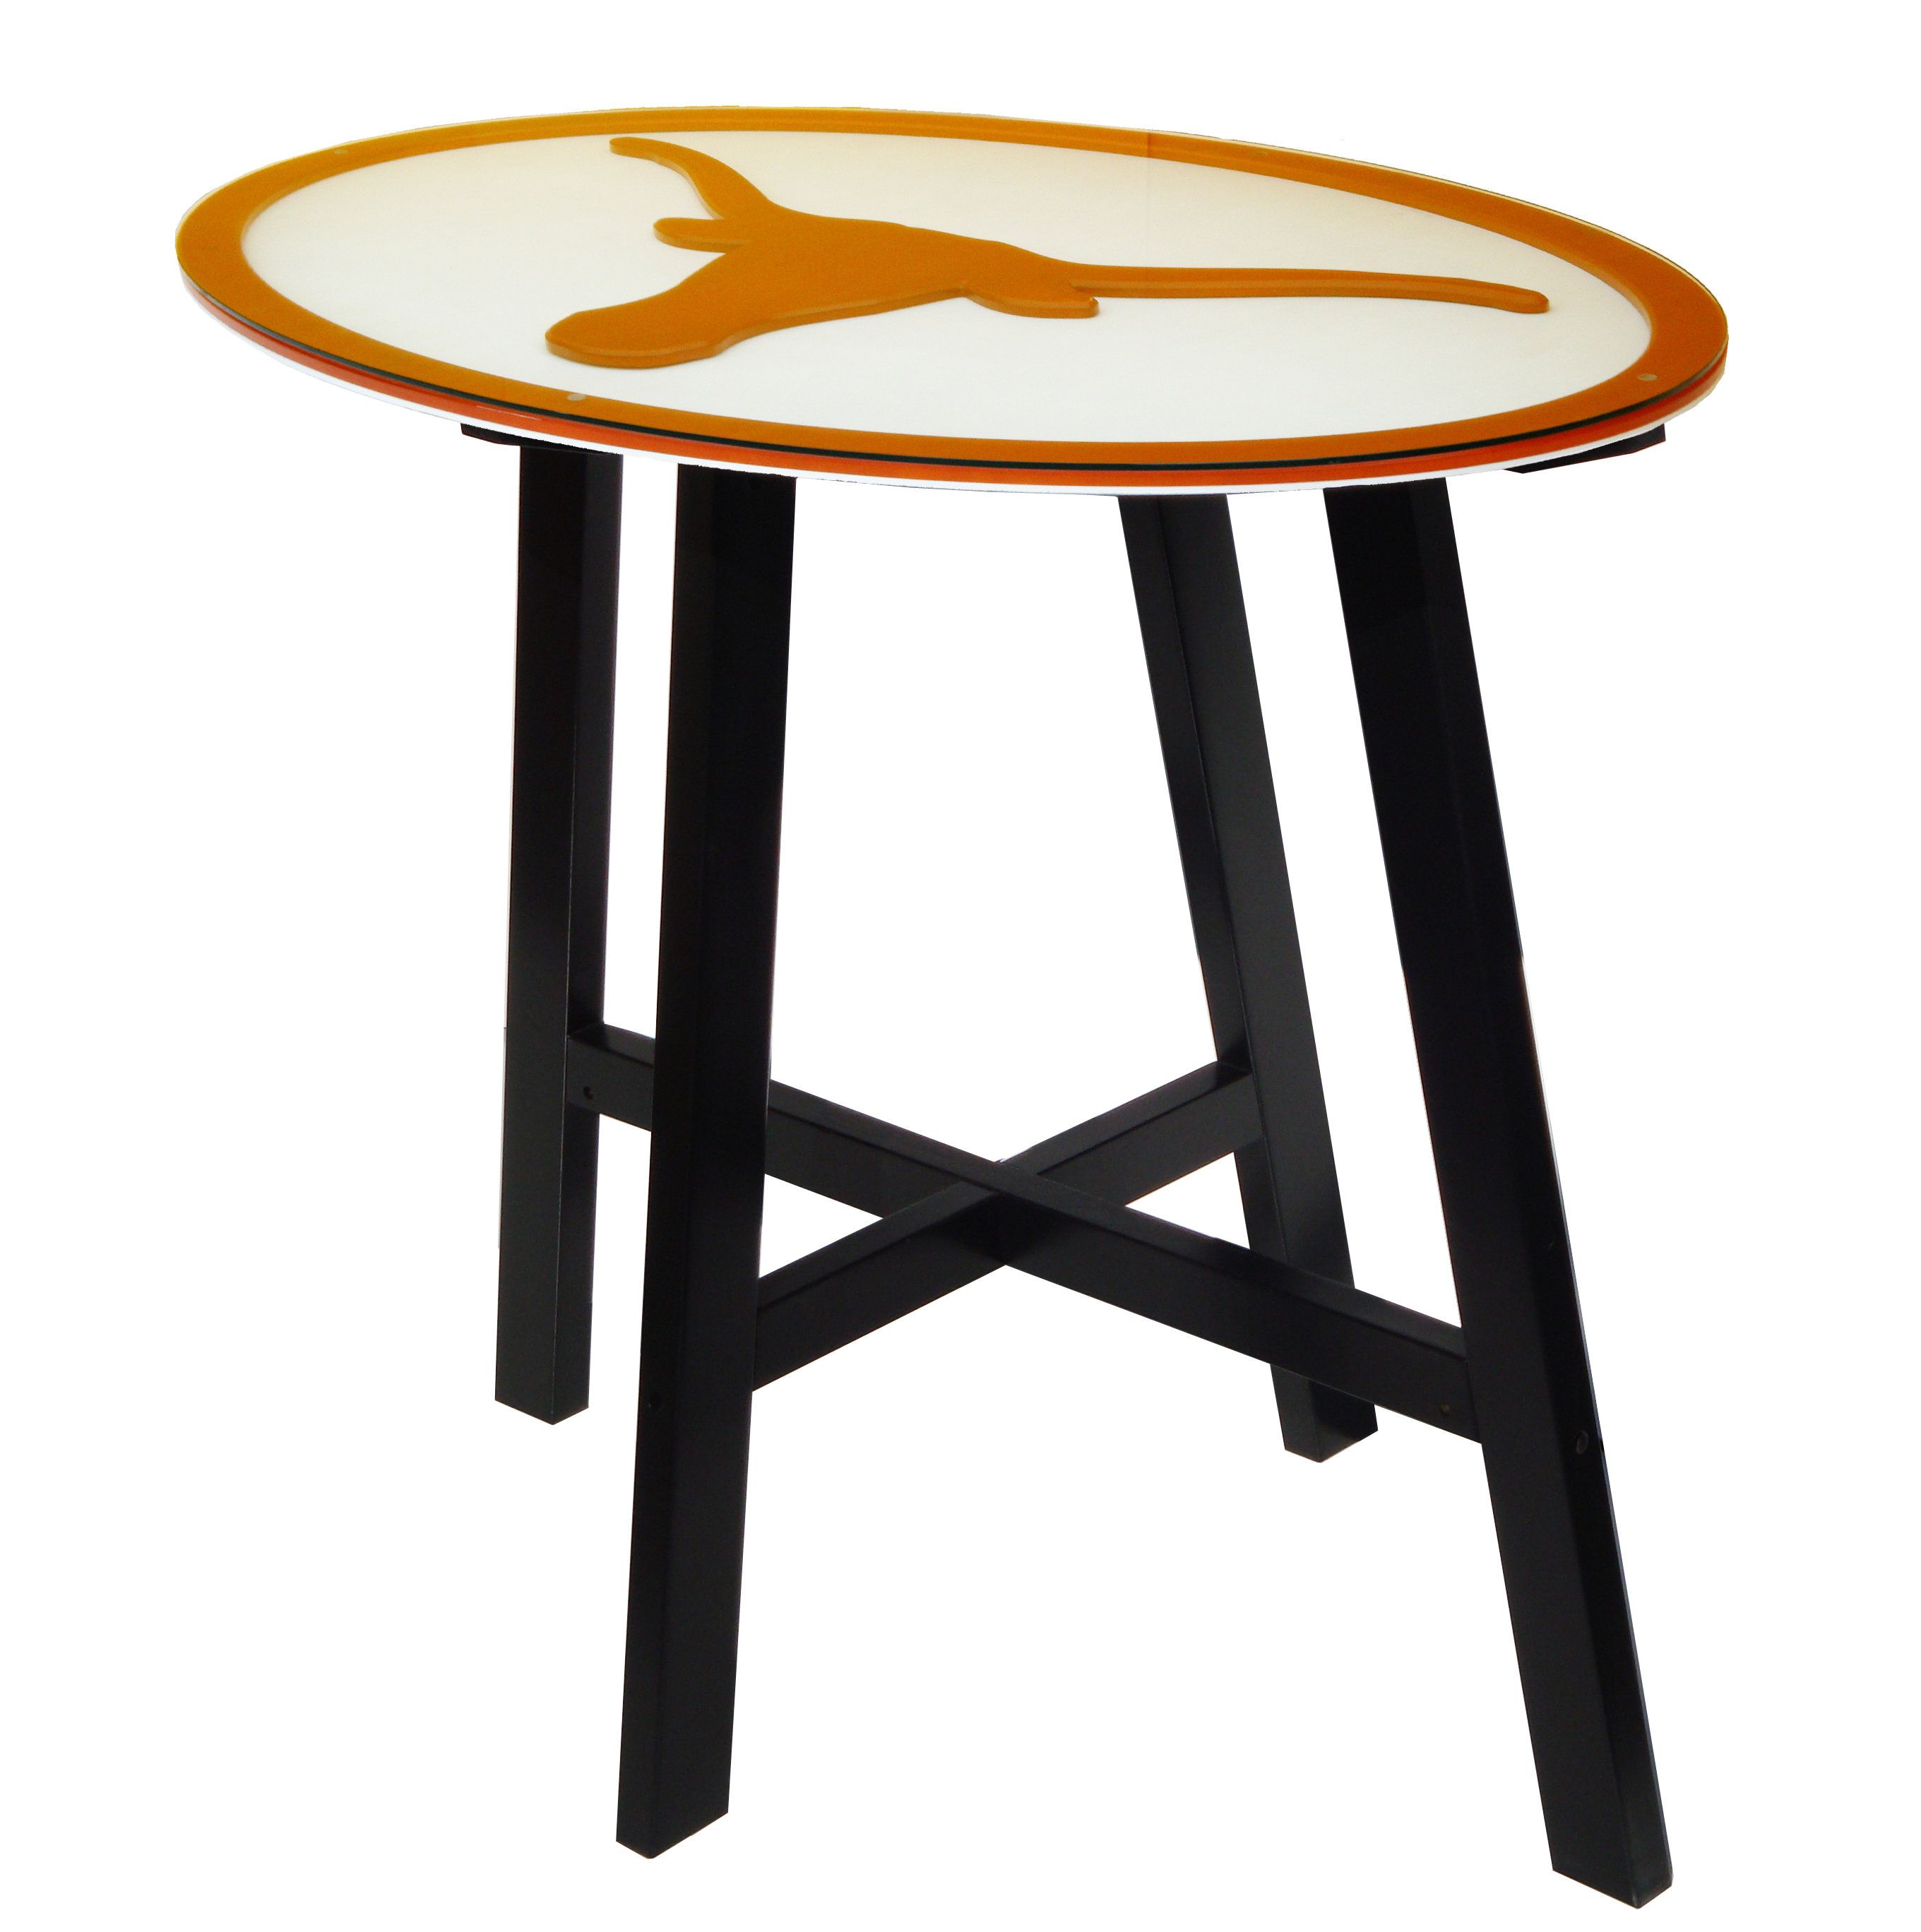 Wayfair Intended For Mountainier Cocktail Tables (View 13 of 20)